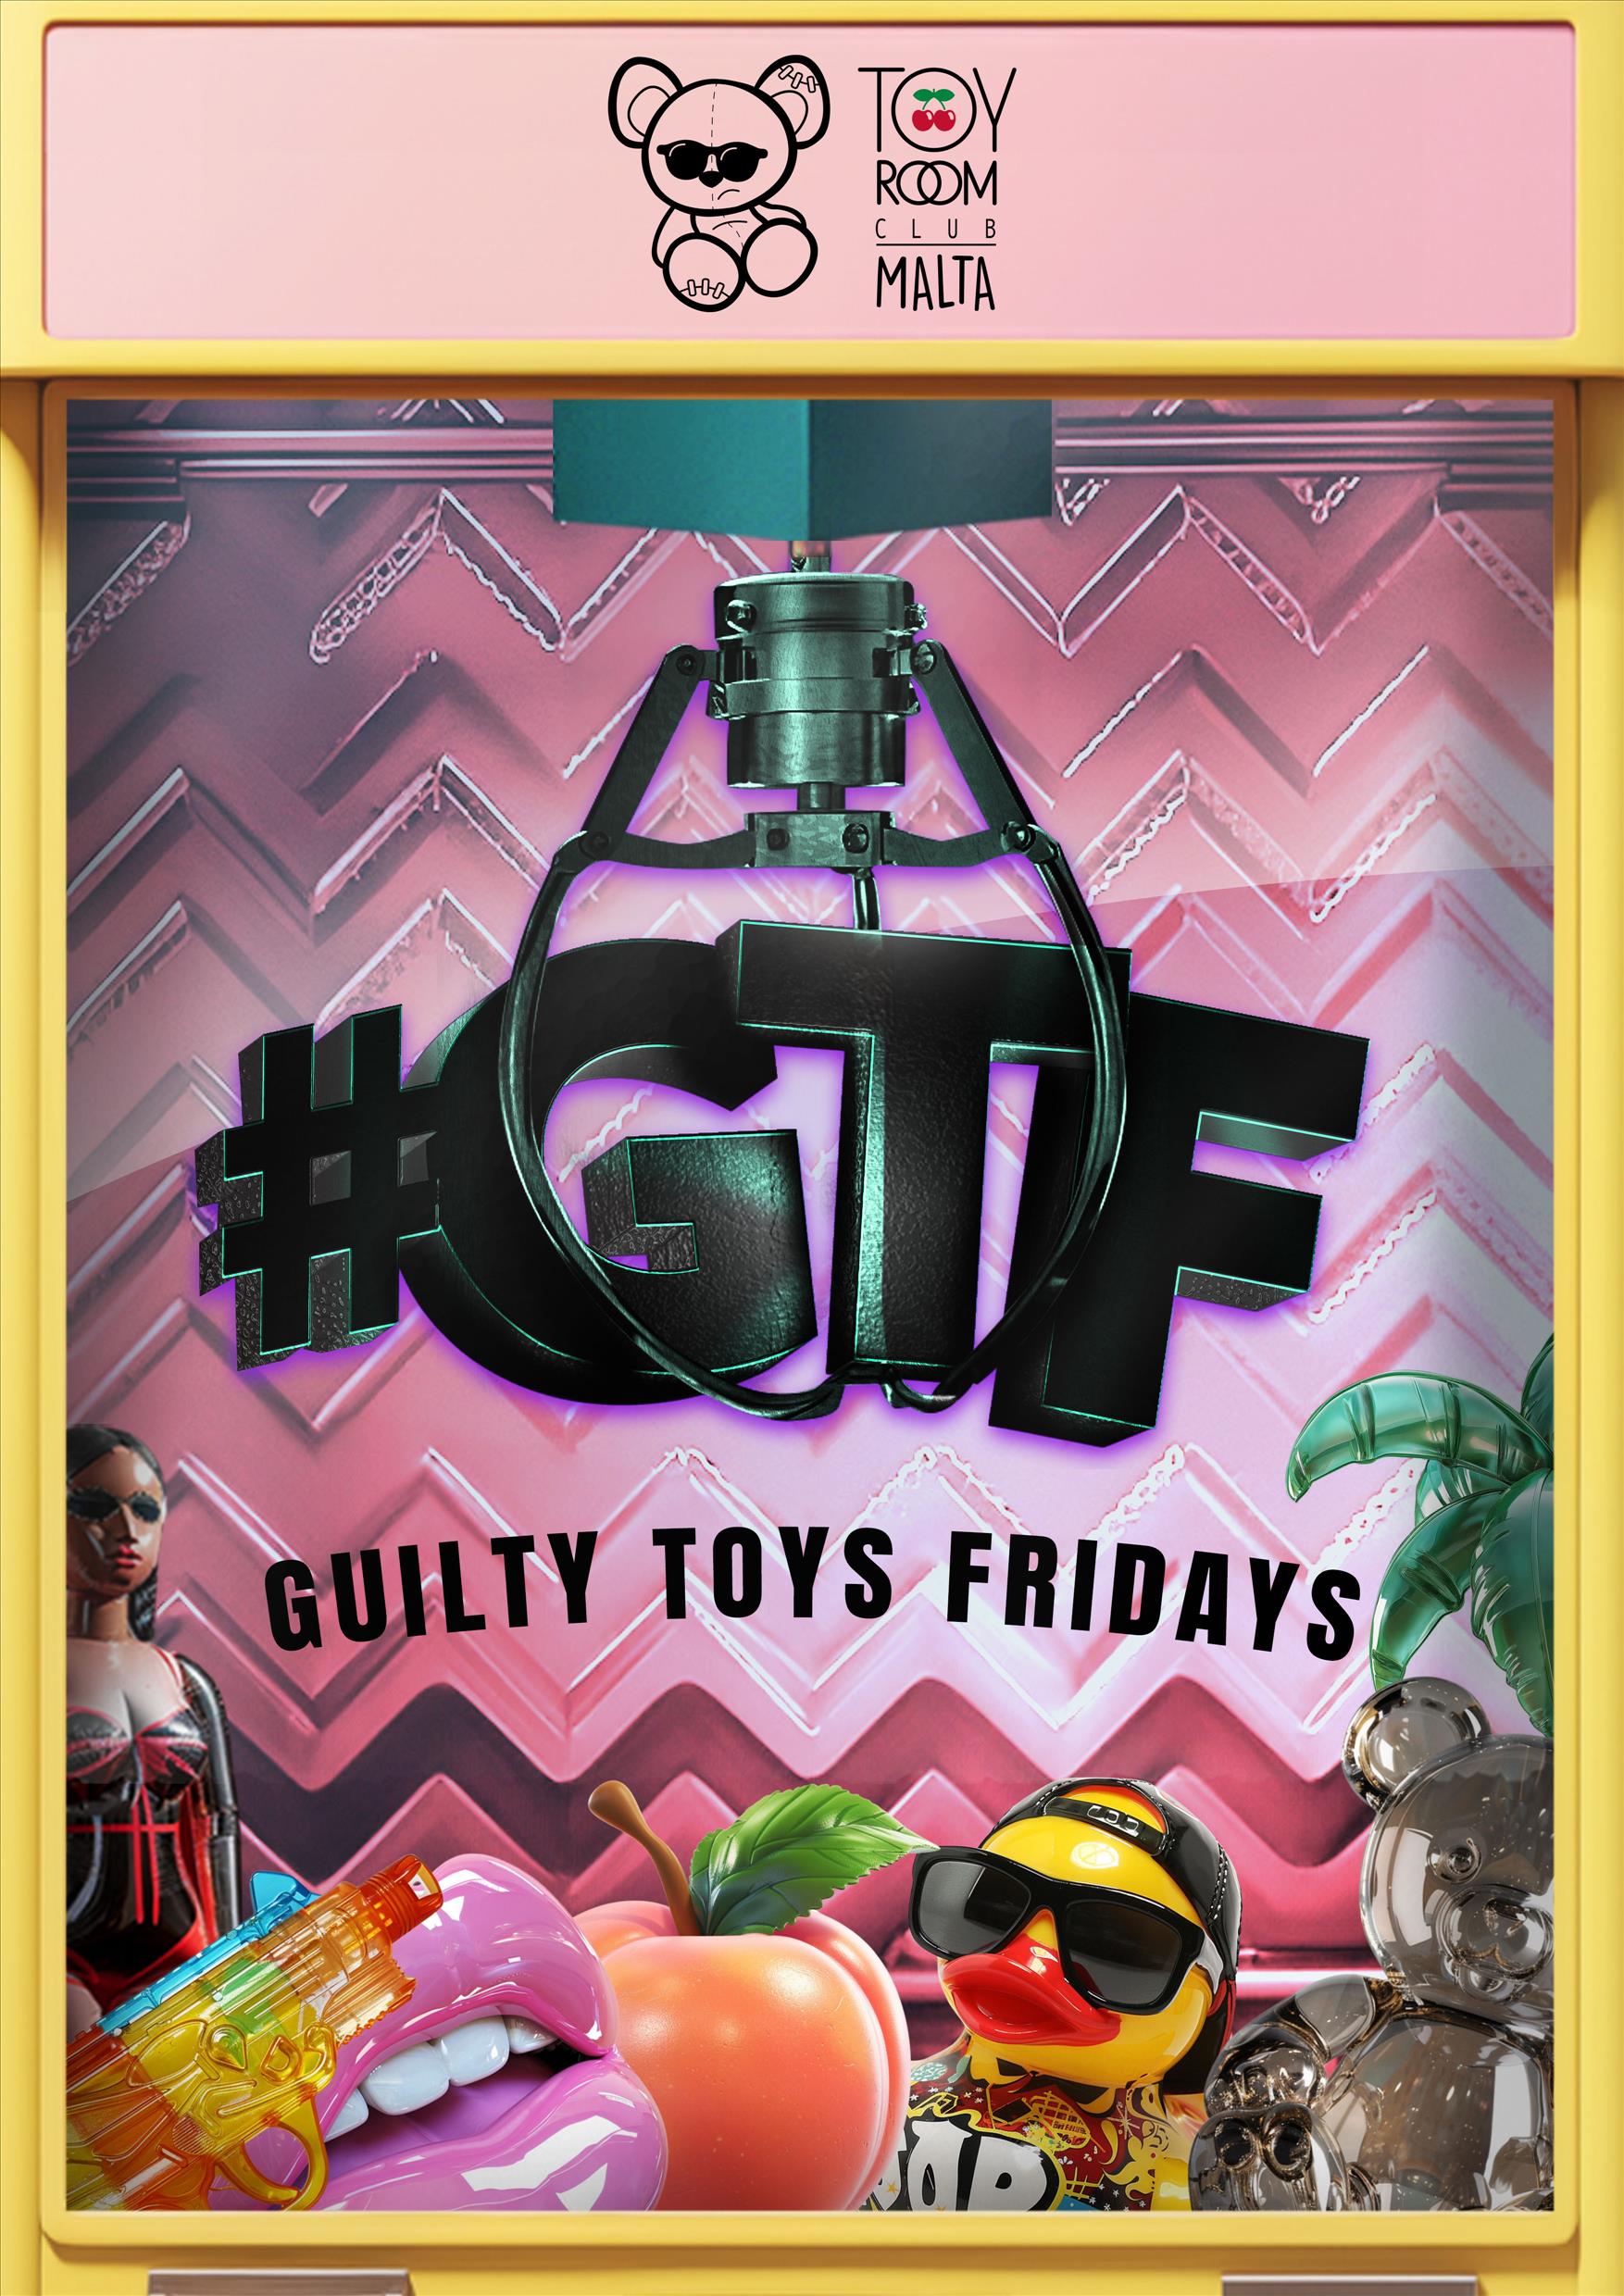 Guilty Toys Fridays poster